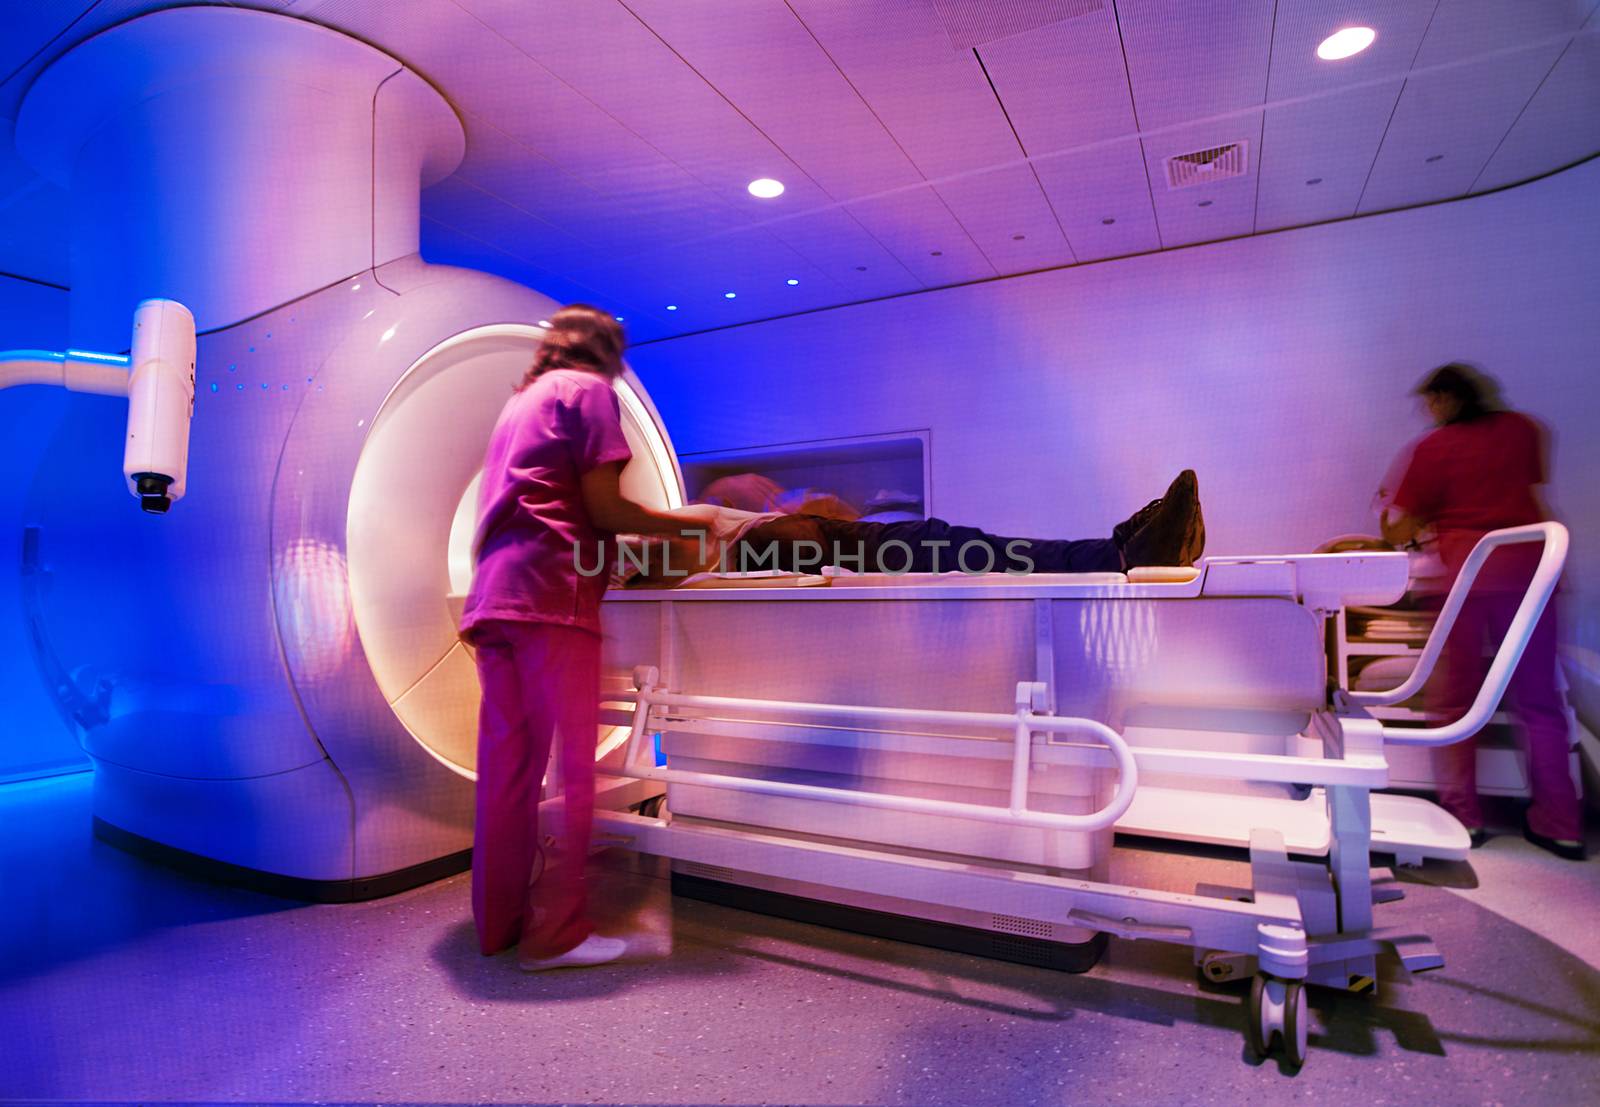 A super powerful modern magnetic resonance scanner is being prepared by nurses for scan with a patient.